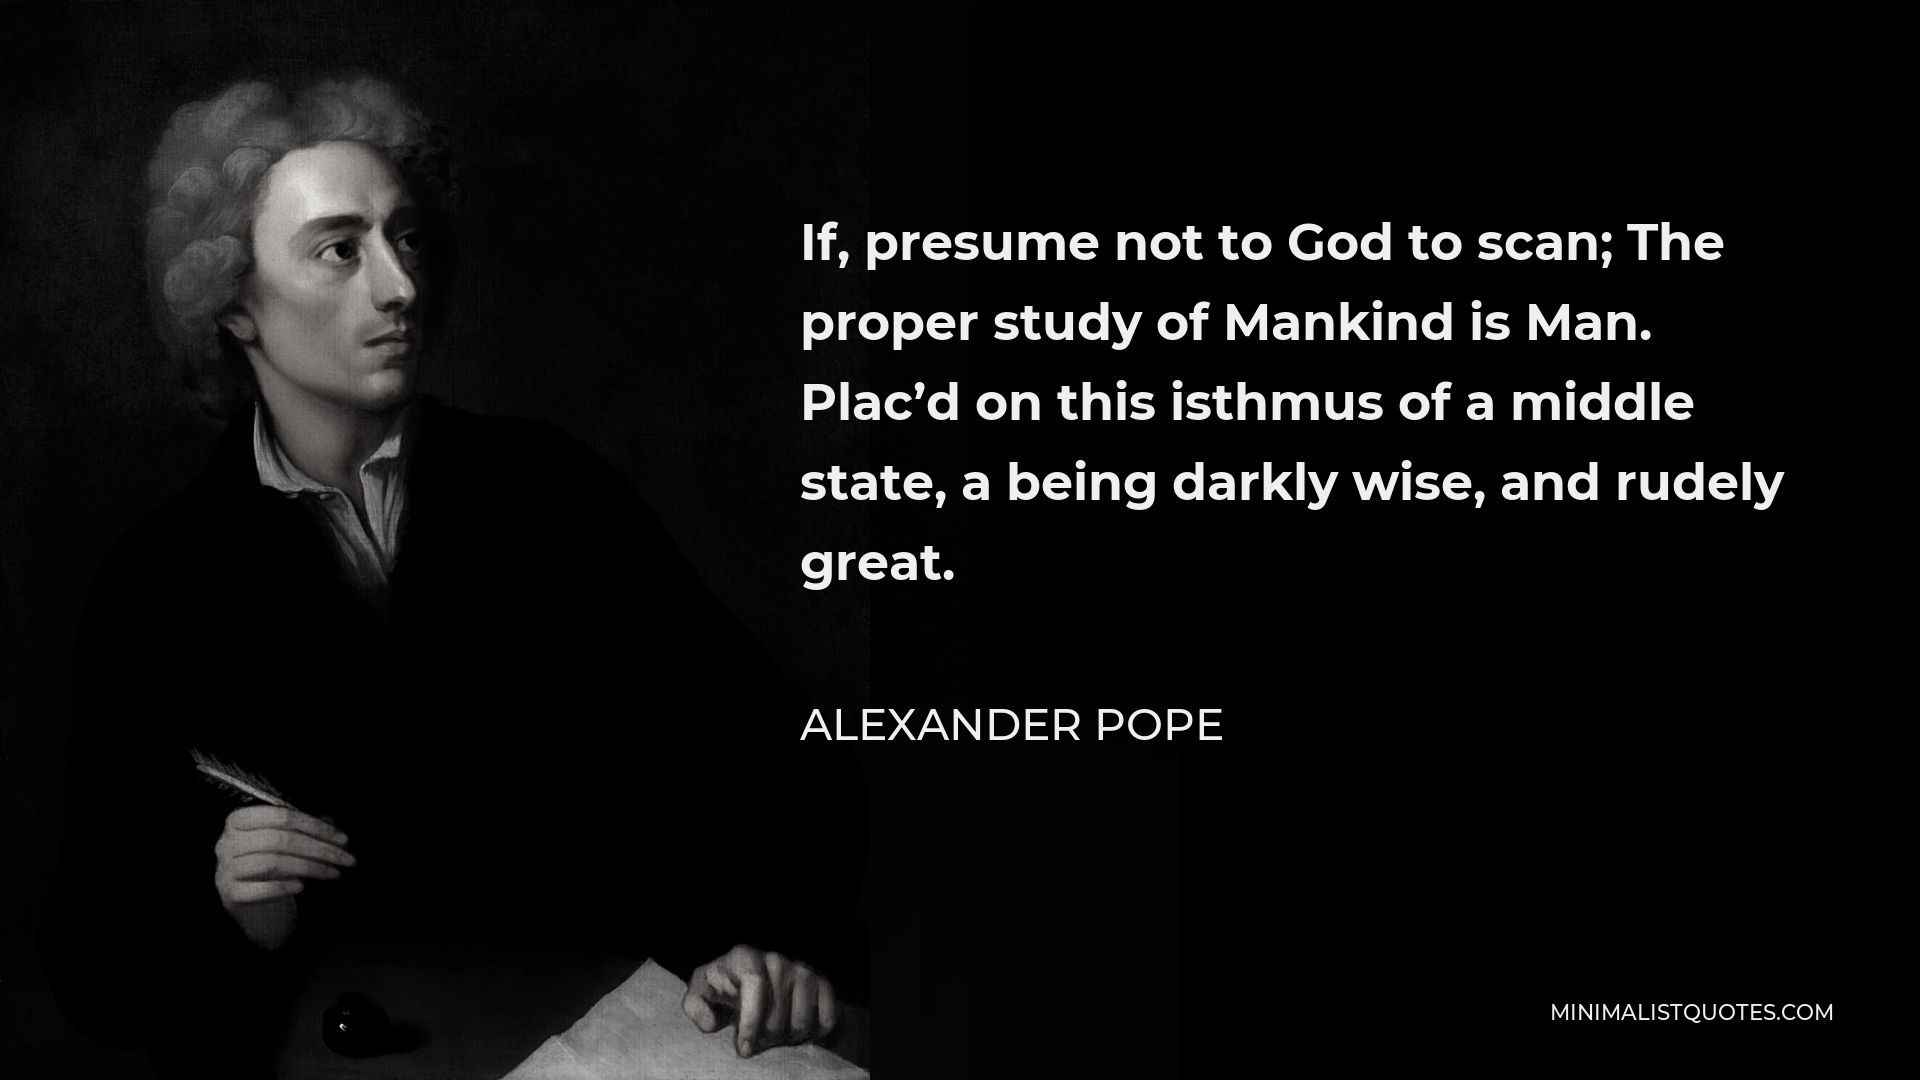 Alexander Pope Quote - If, presume not to God to scan; The proper study of Mankind is Man. Plac’d on this isthmus of a middle state, a being darkly wise, and rudely great.